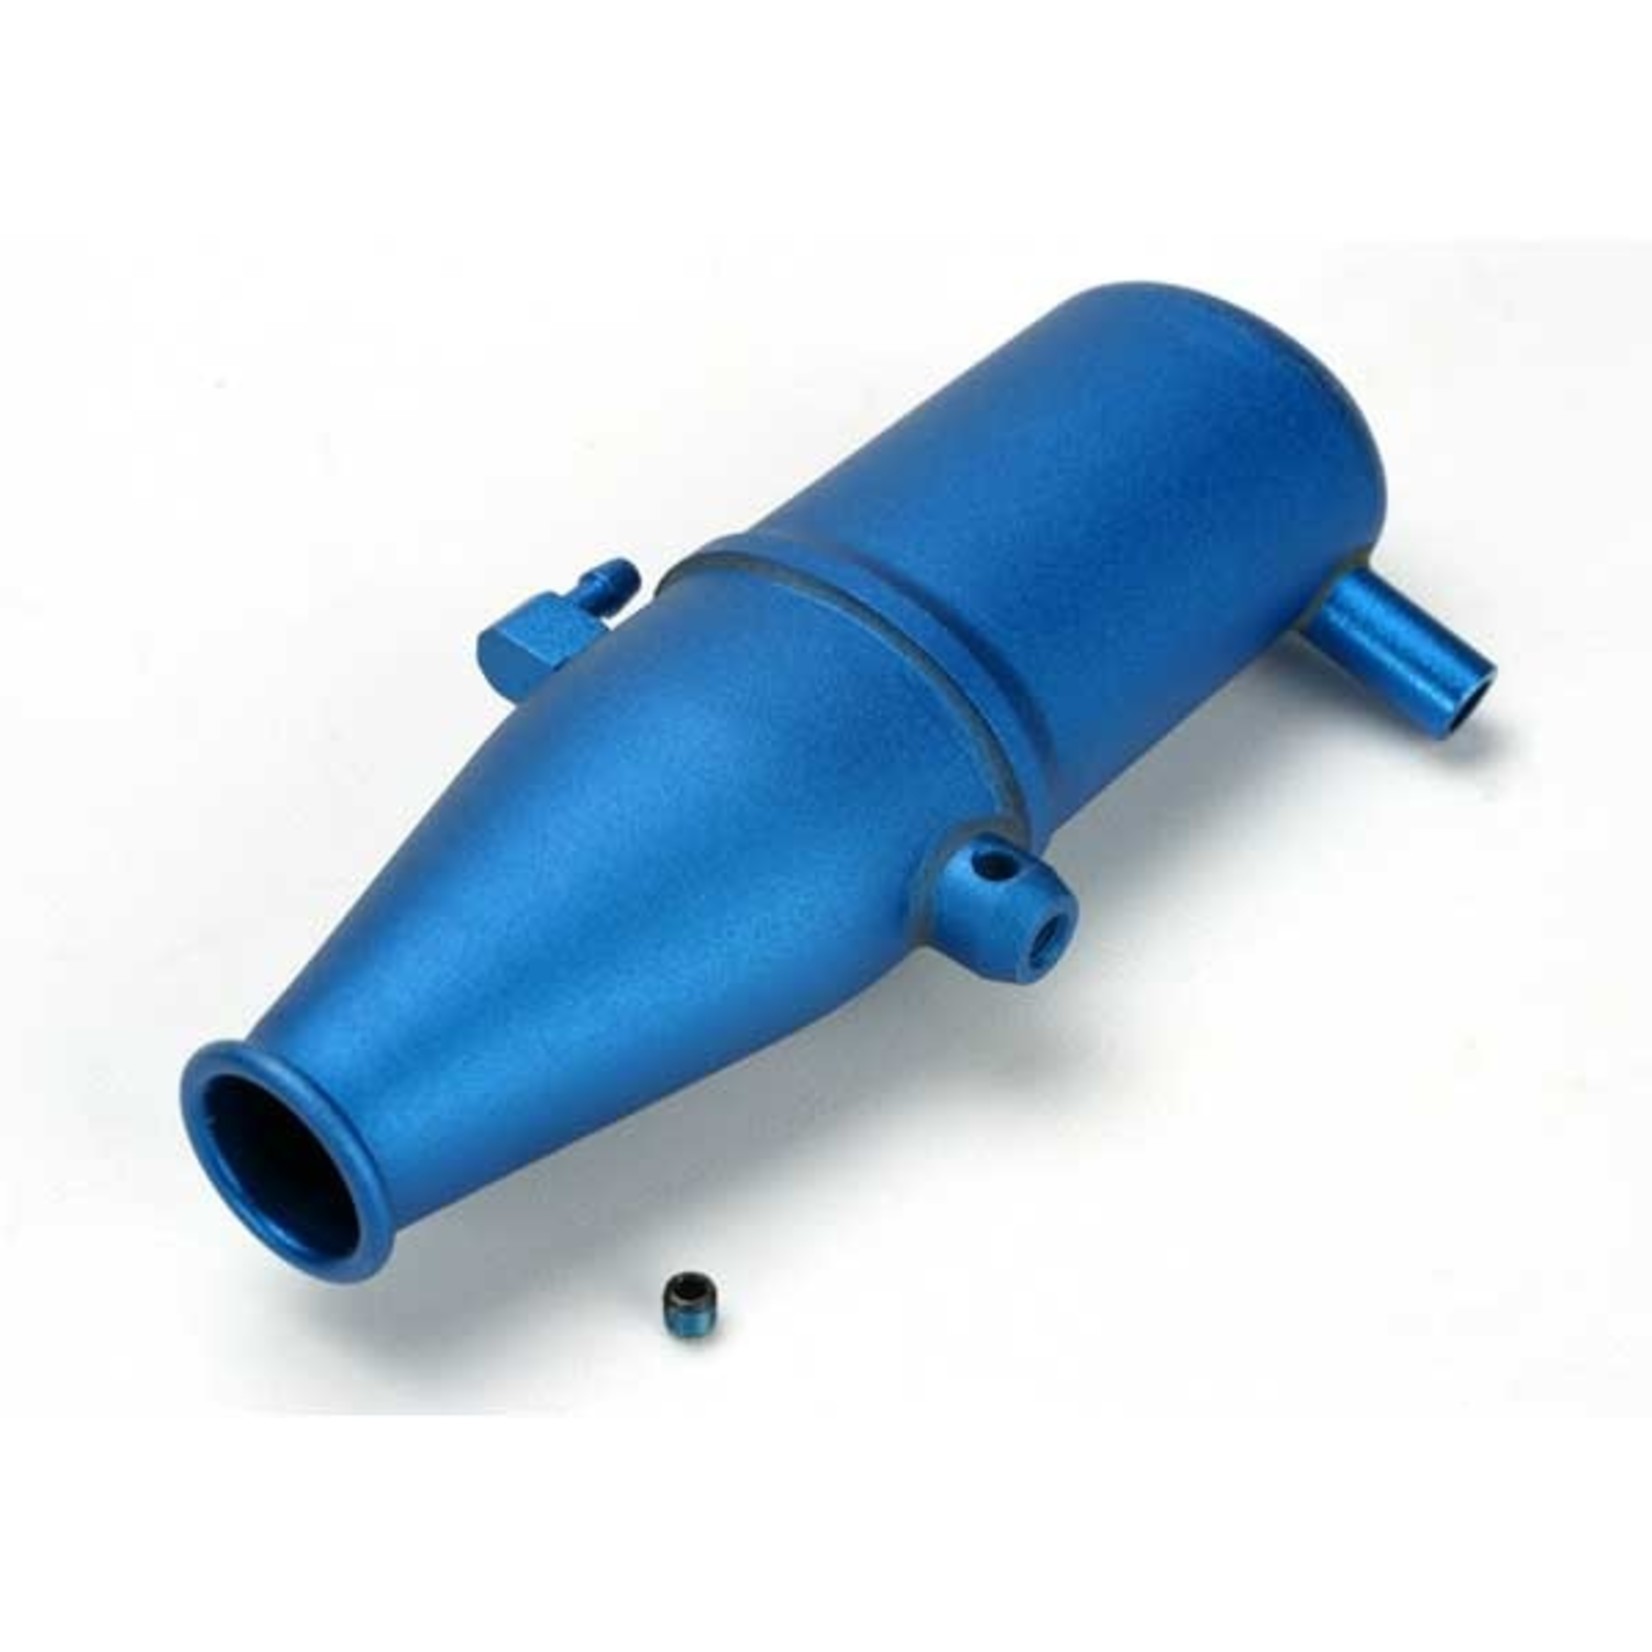 Traxxas 5342 - Tuned pipe, aluminum, blue anodized (dual c